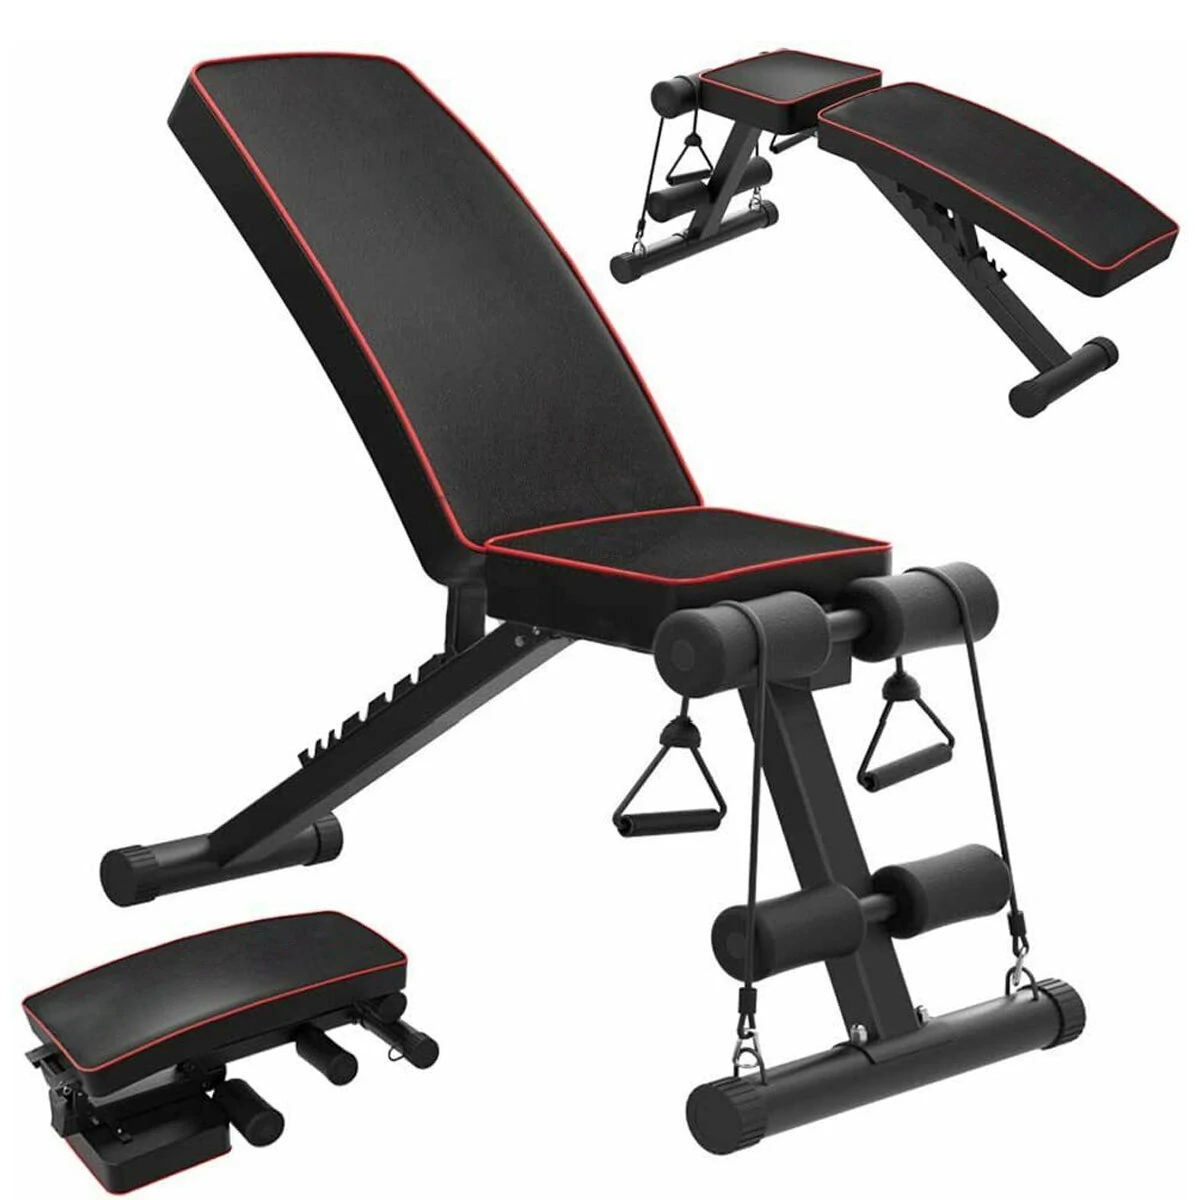 Adjustable Folding Sit Up Benches Abdominal Muscle Training Machine Utility Home Gym Fitness Equipment